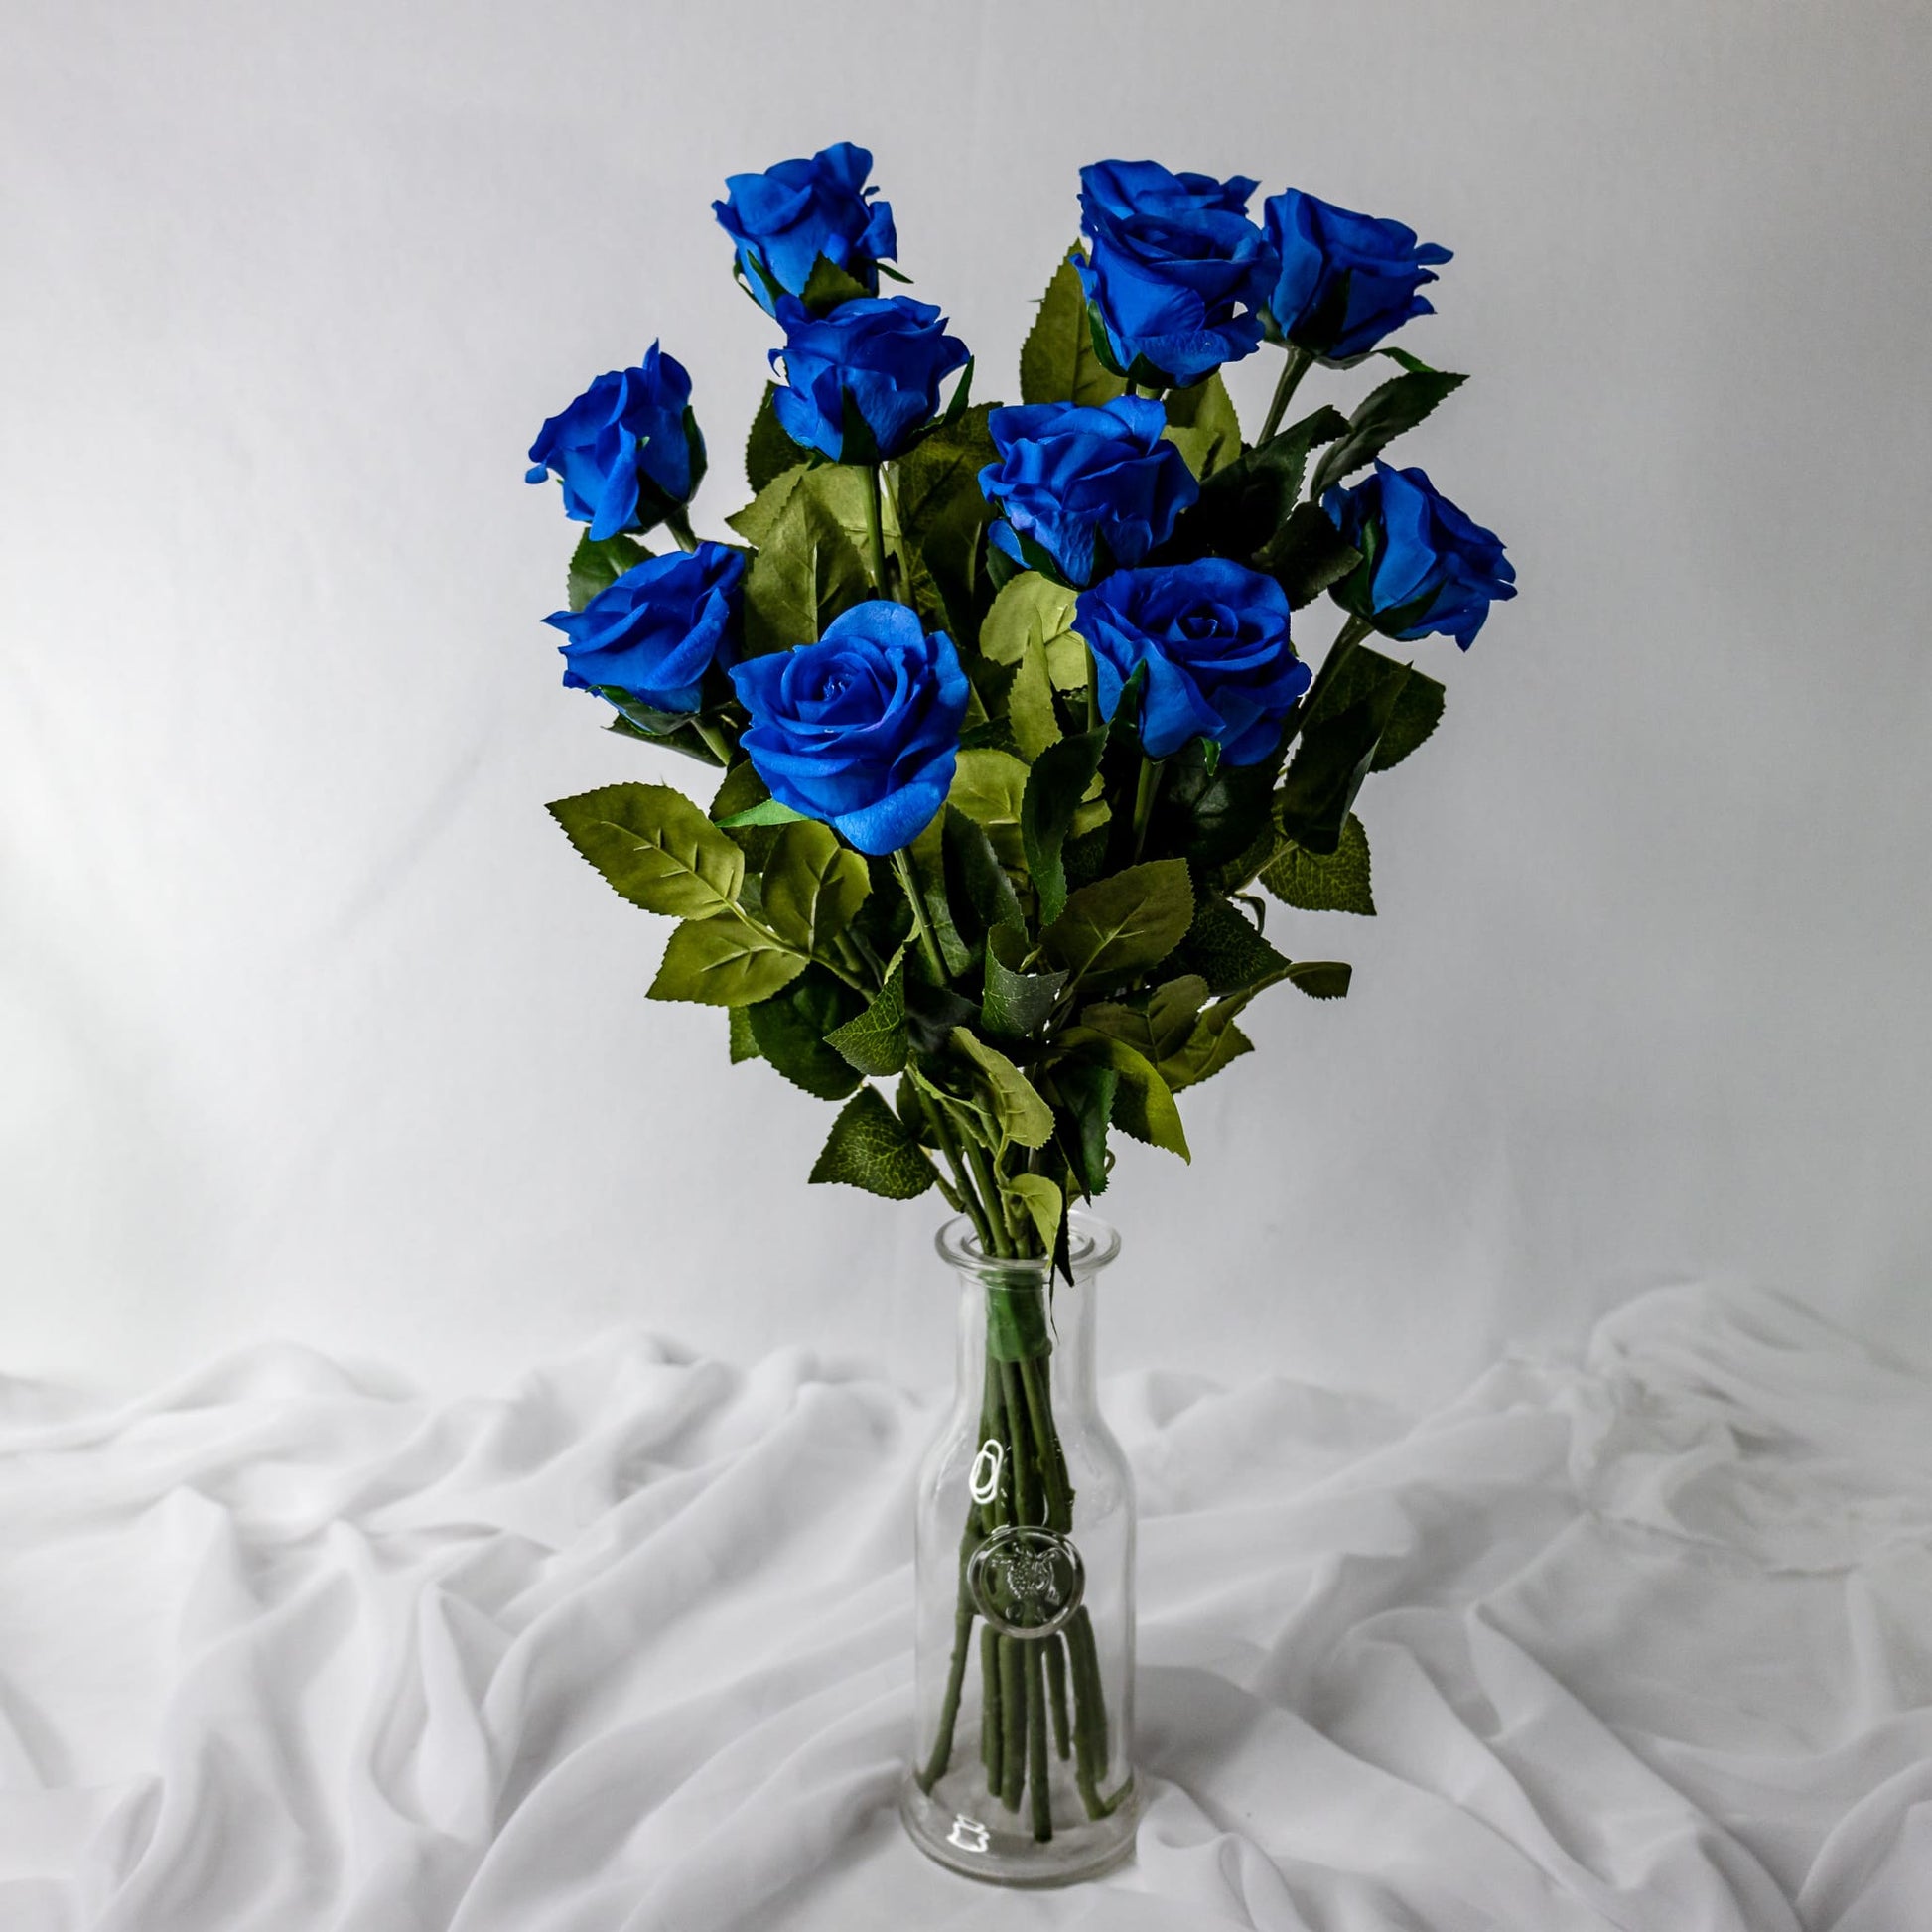 artificial deep blue roses in half bloom placed in clear glass vase